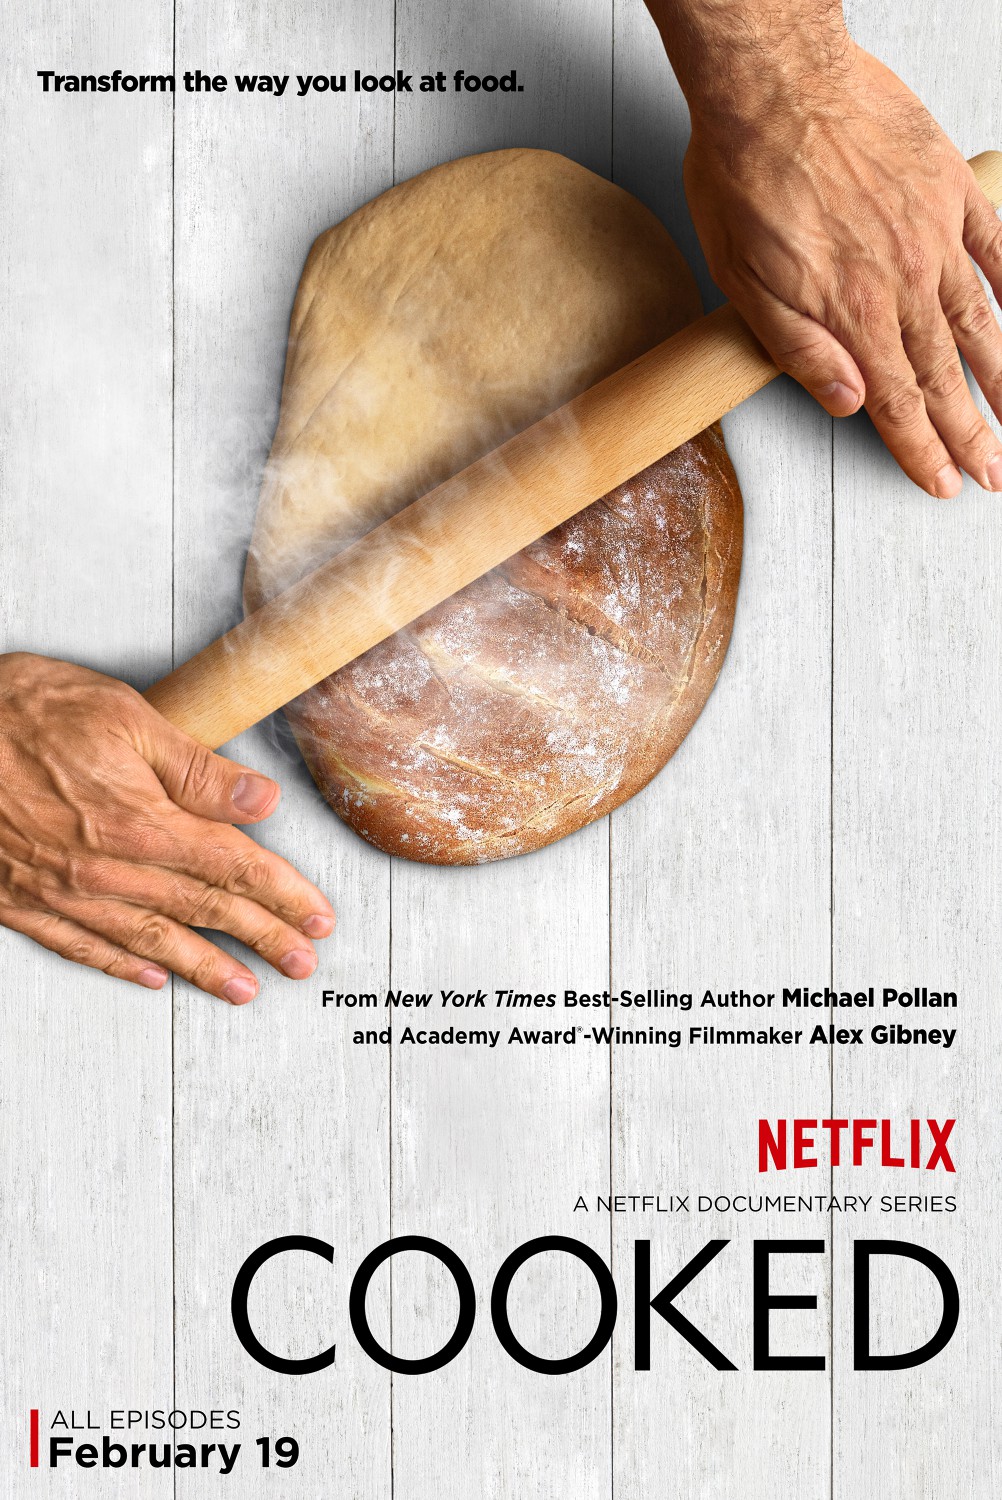 Extra Large TV Poster Image for Cooked 